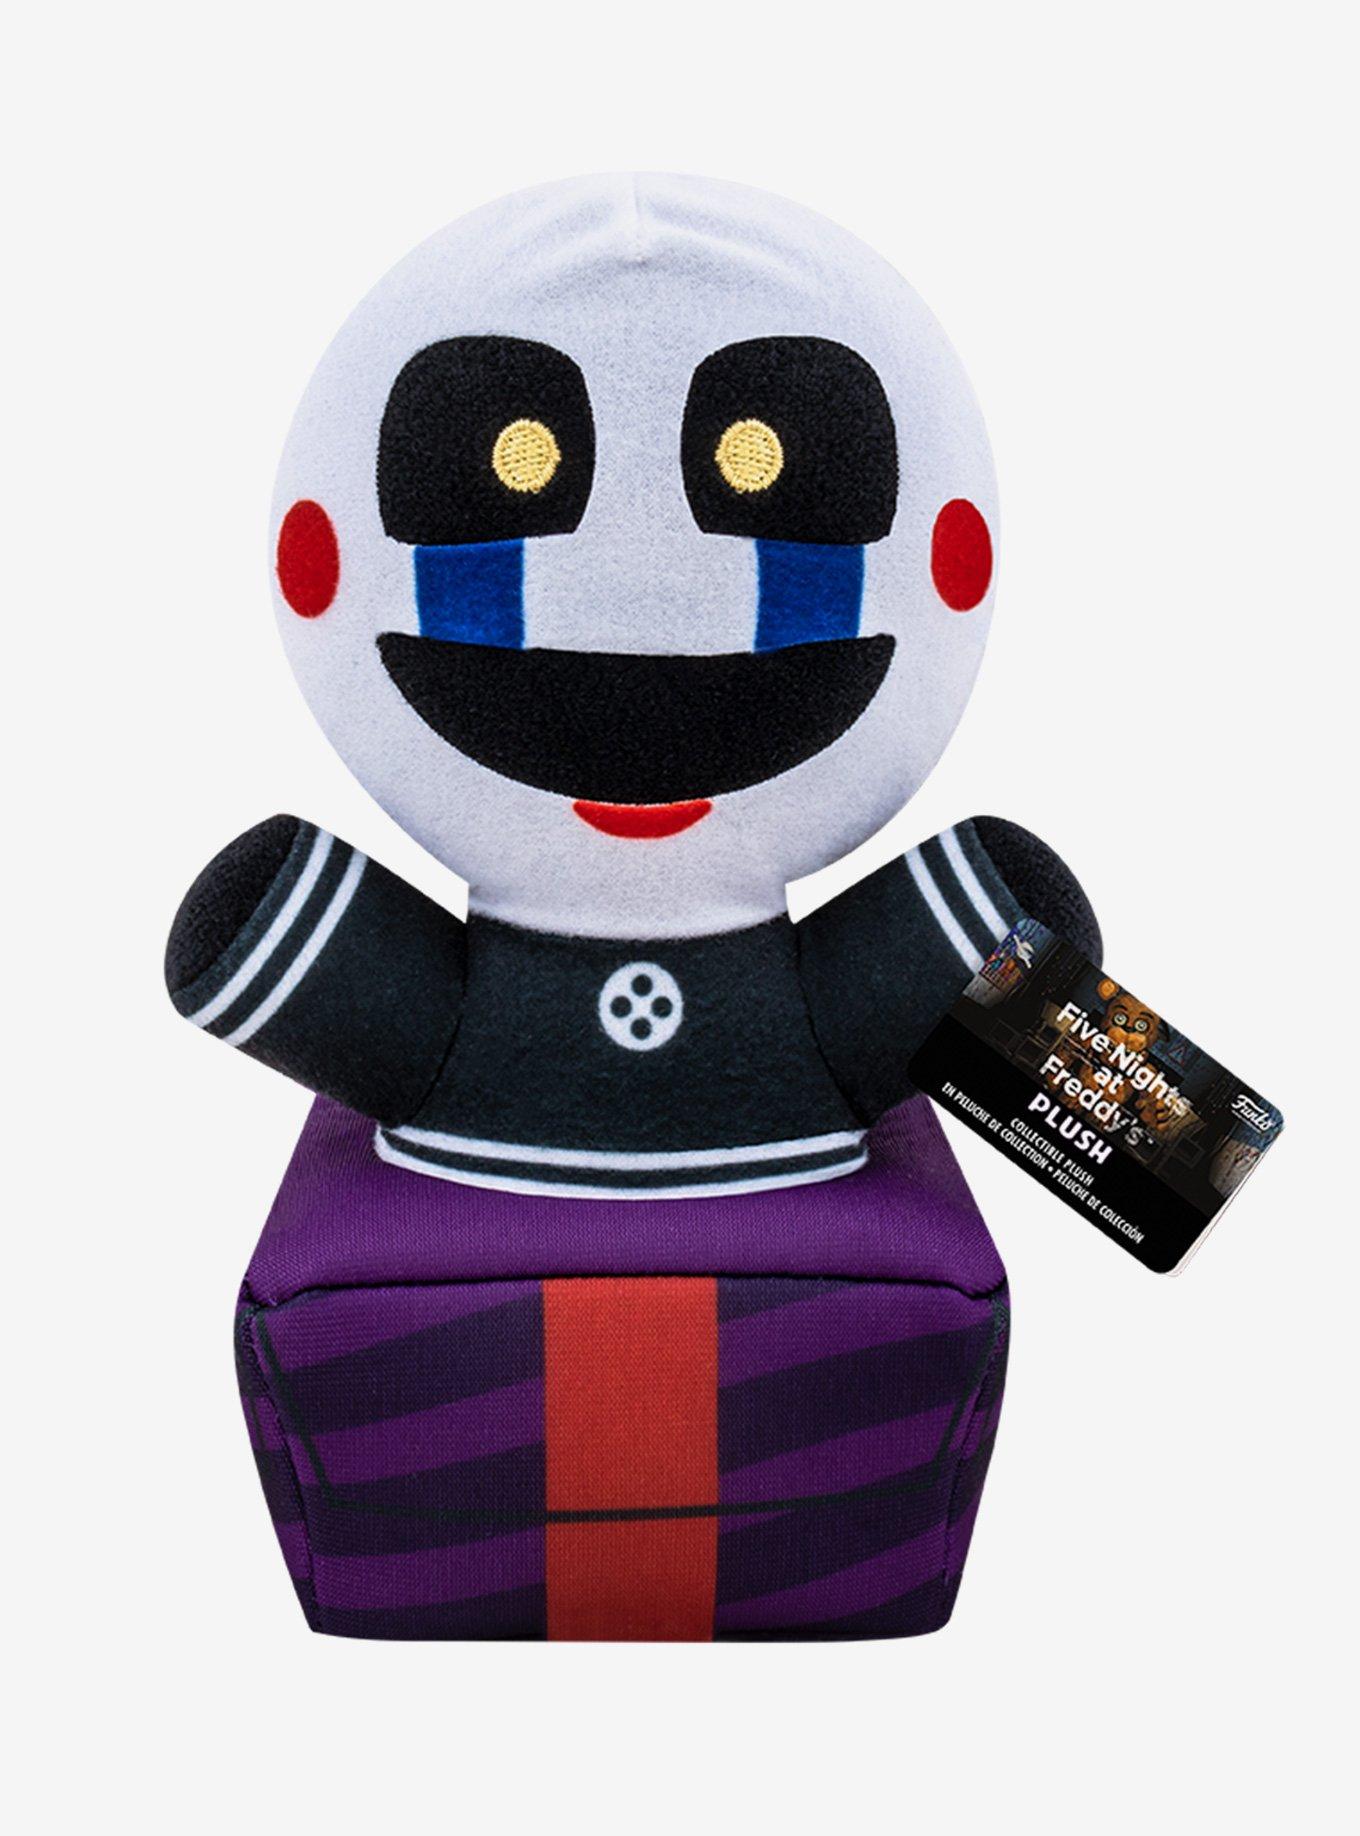 Funko Five Nights At Freddy's Security Puppet Plush | Hot Topic